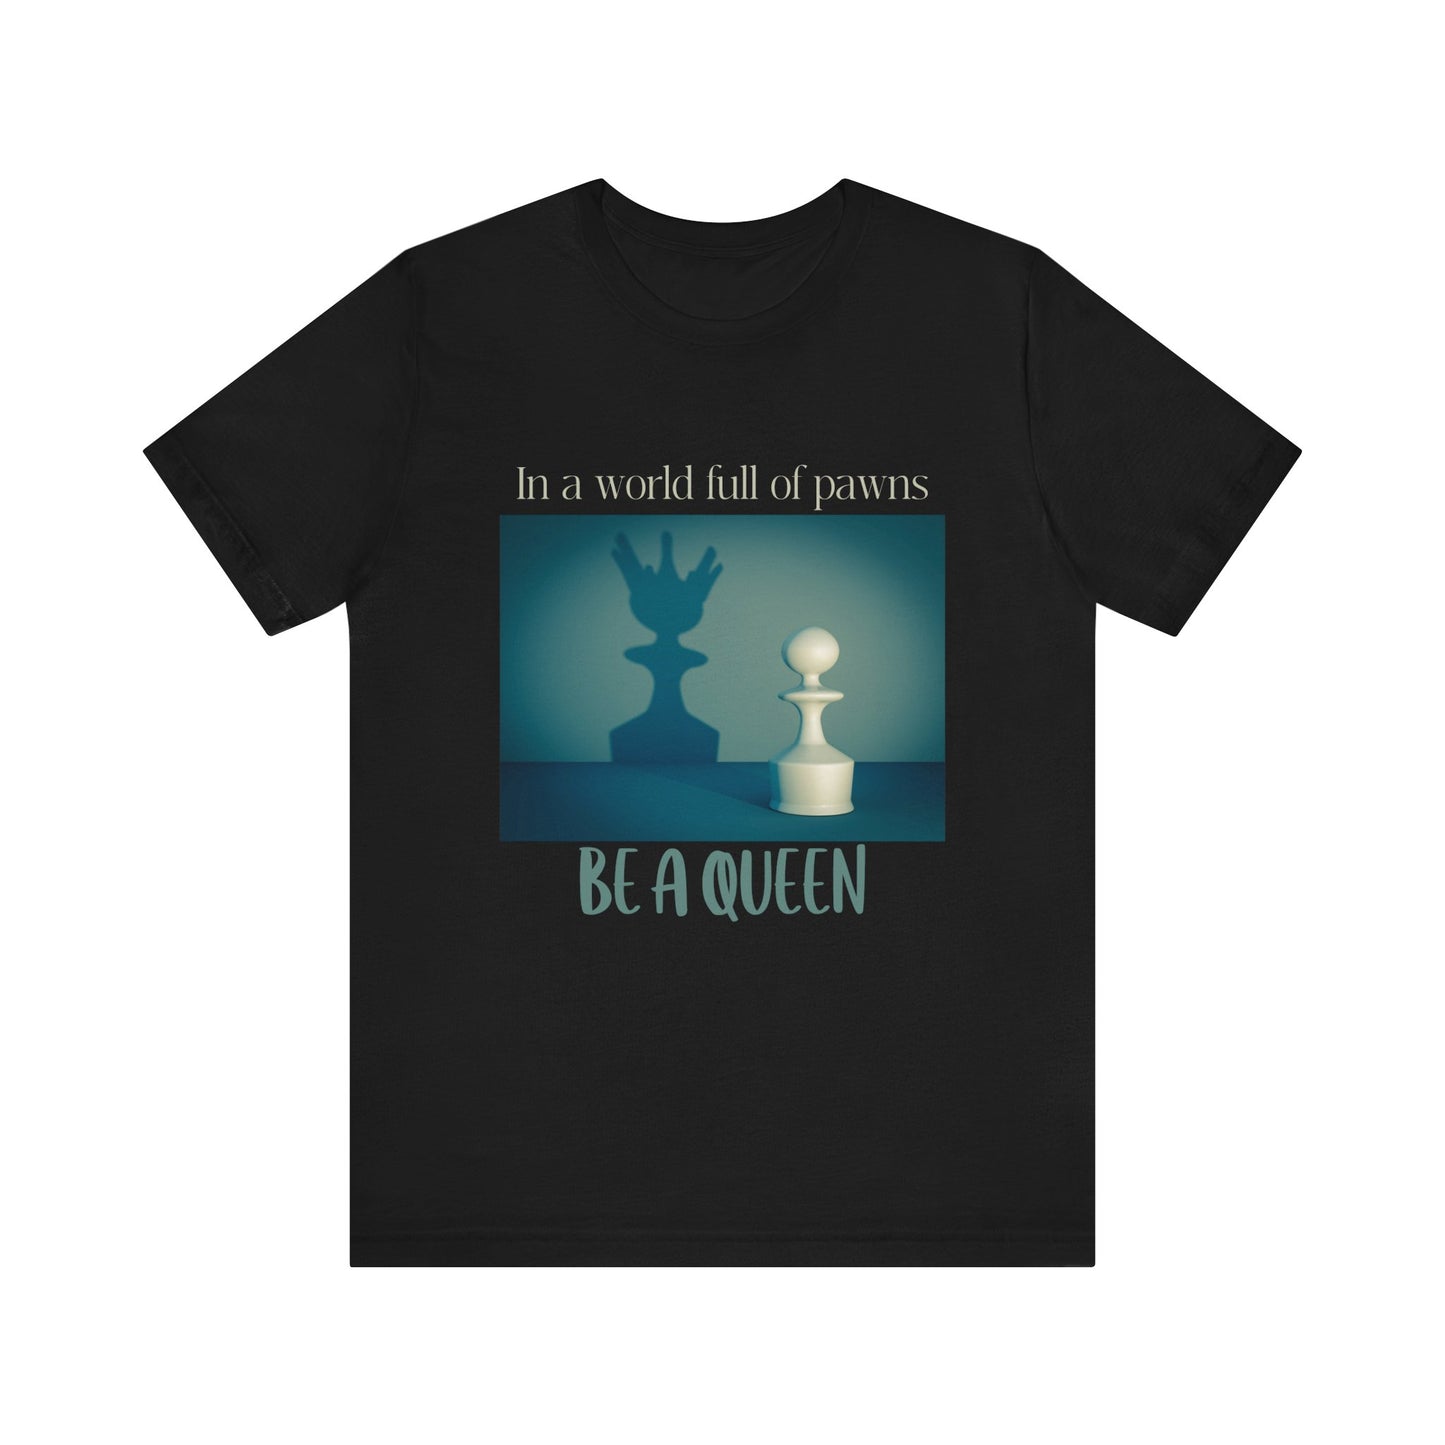 This tee shirt is a Great Gift for a board gamer, chess player, play more board games